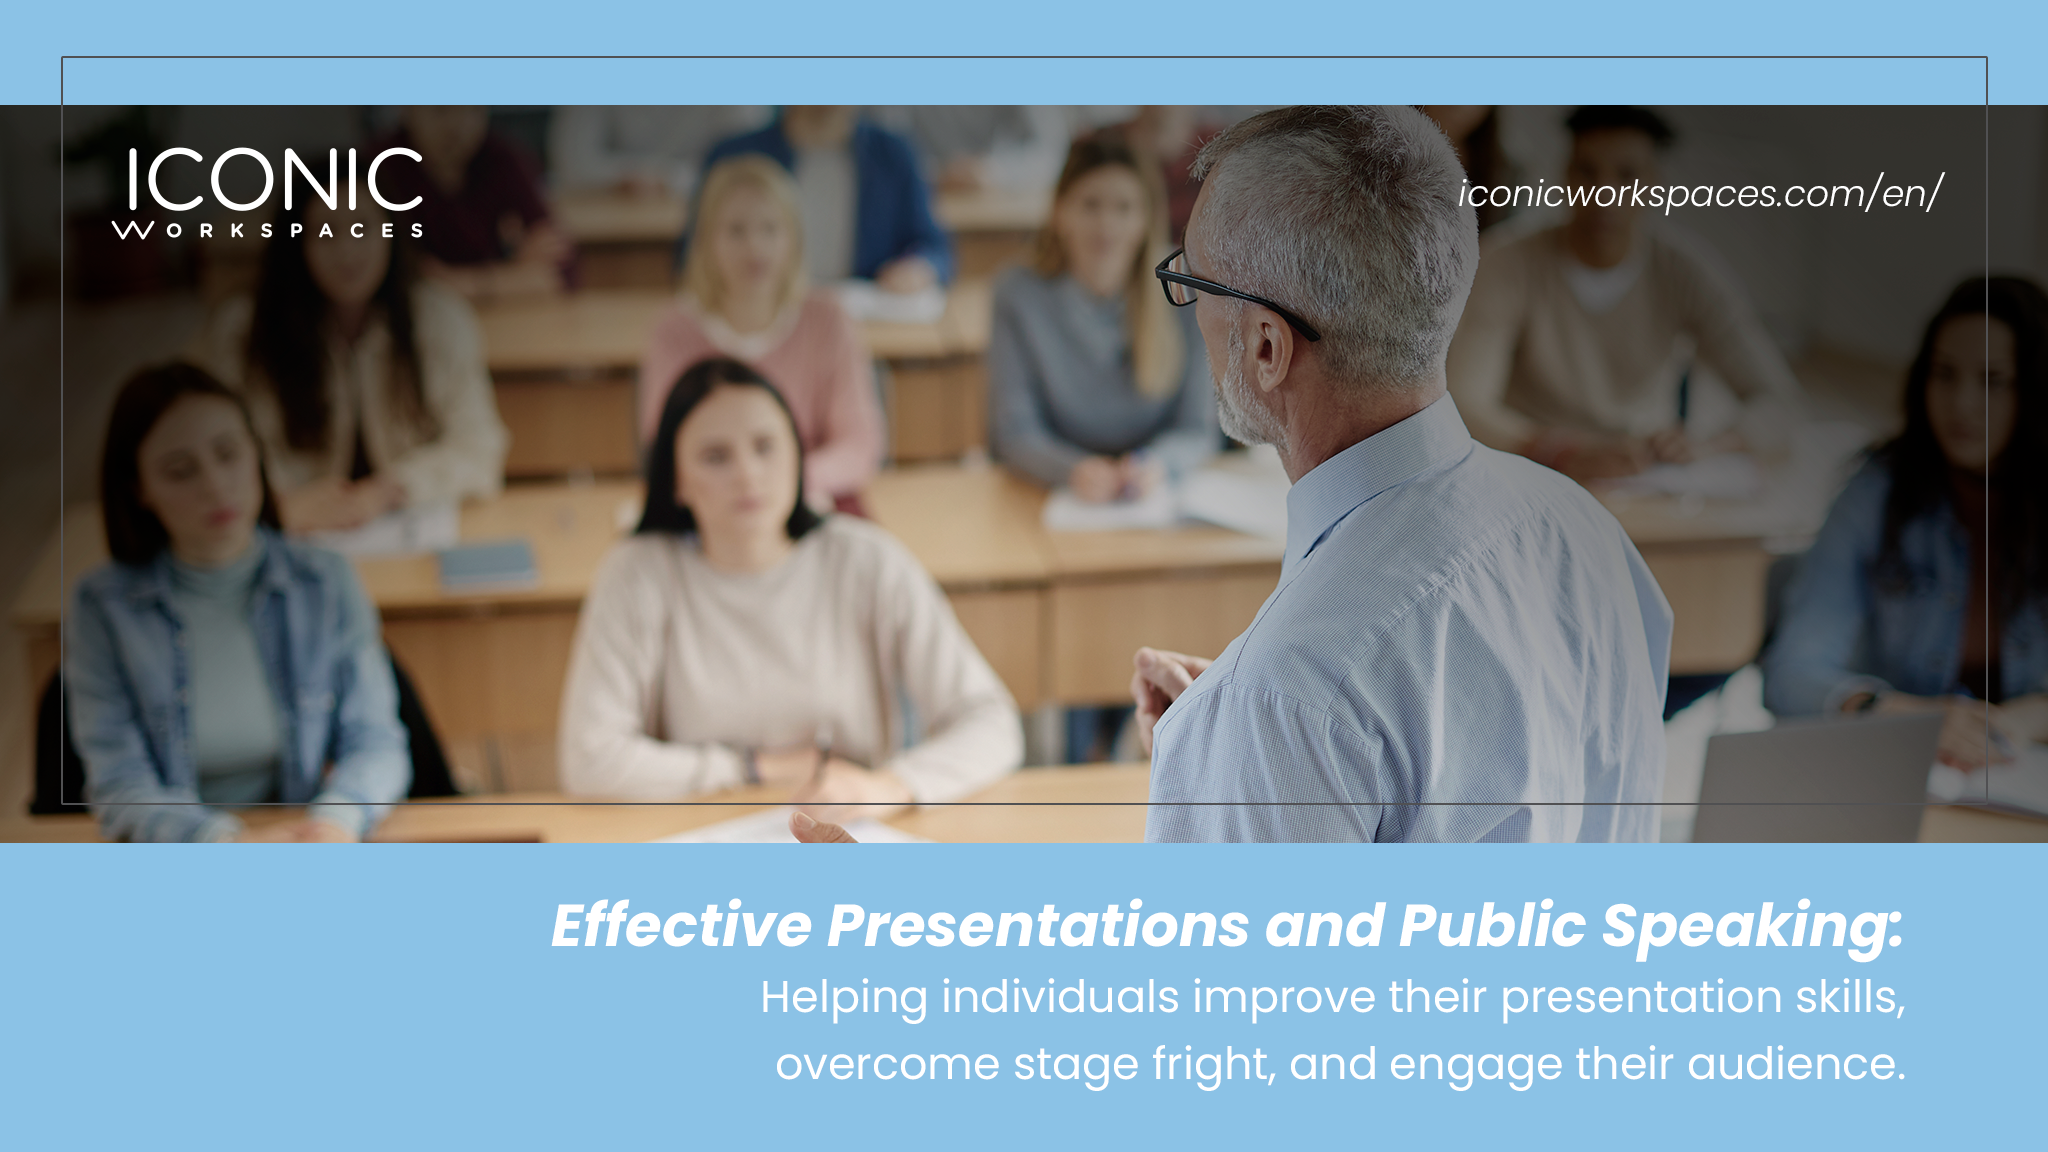 Title: Effective Presentations and Public Speaking: Empowering Individuals to Master Presentation Skills, Overcome Stage Fright, and Captivate Their Audience in the Training Room